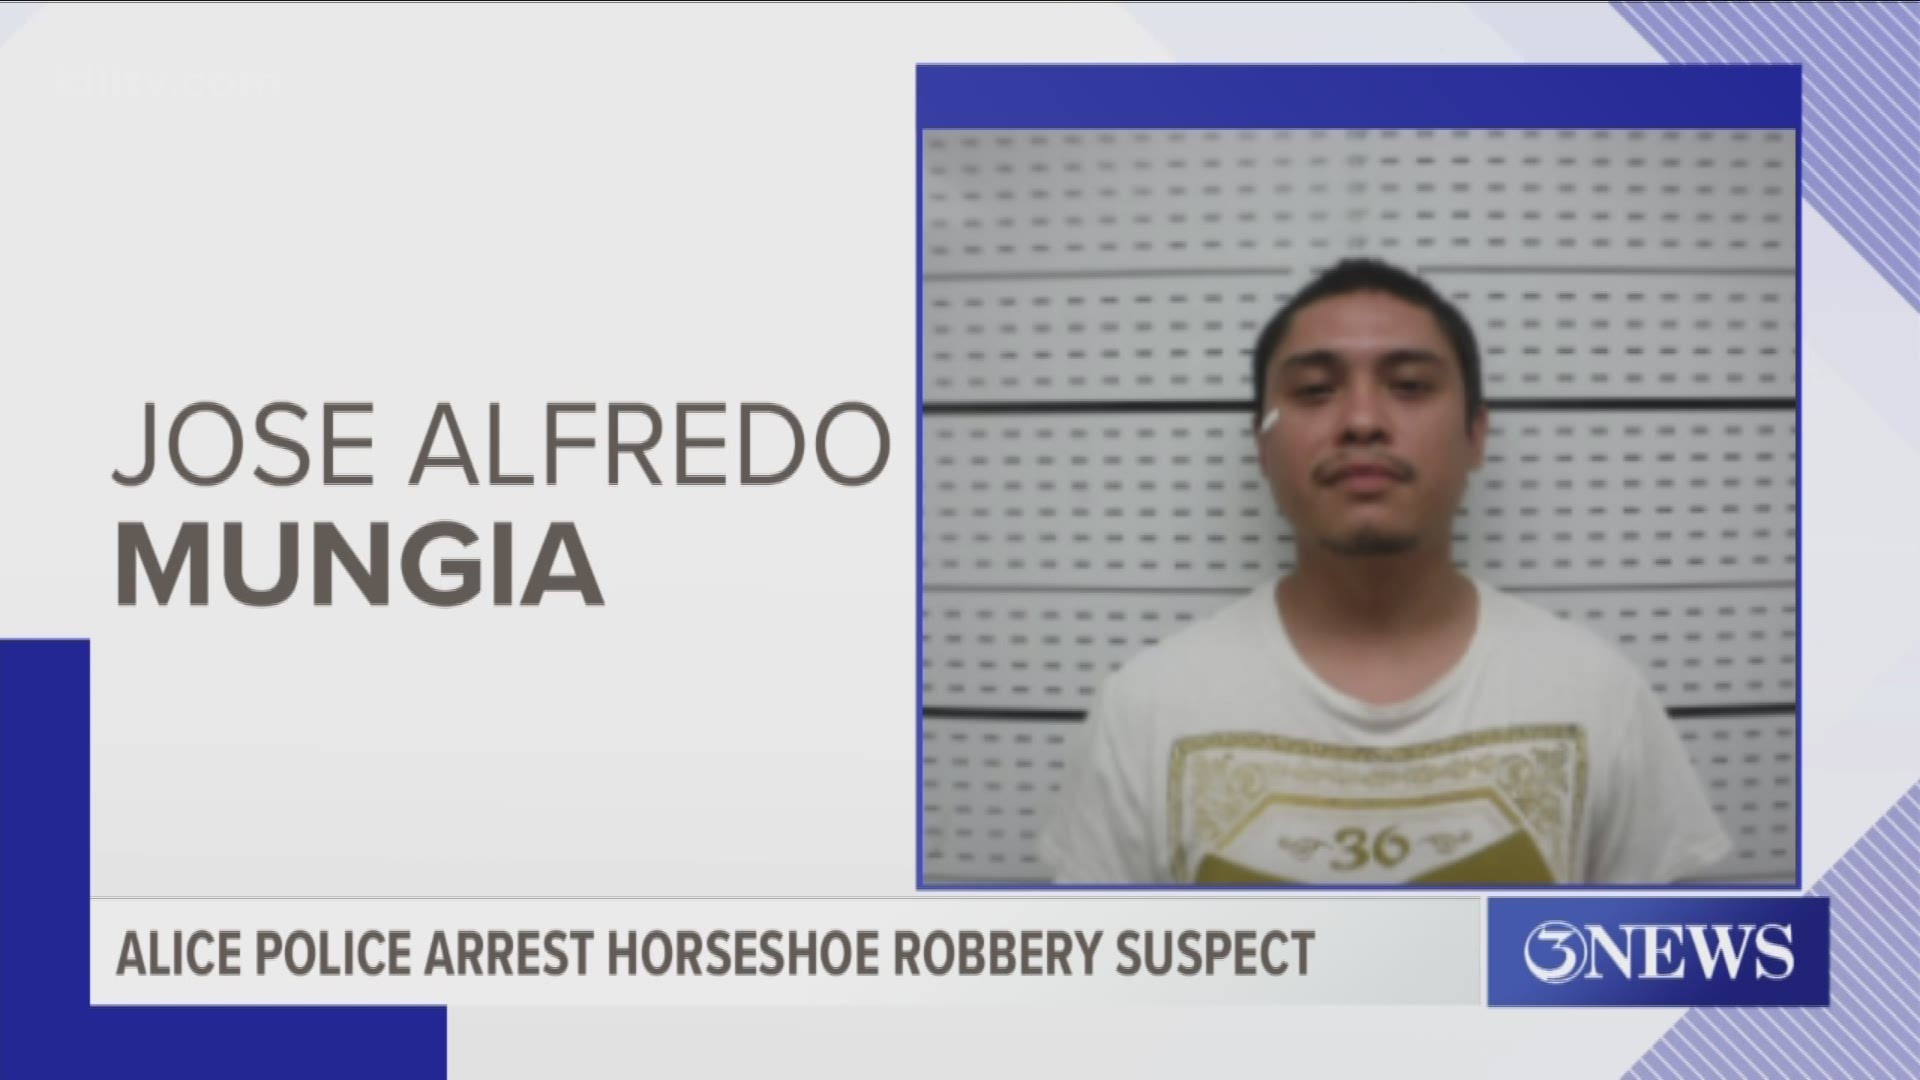 Police in Alice, TX have arrested a man they said is responsible for burglarizing a Horseshoes Western Store store on 3rd Street.